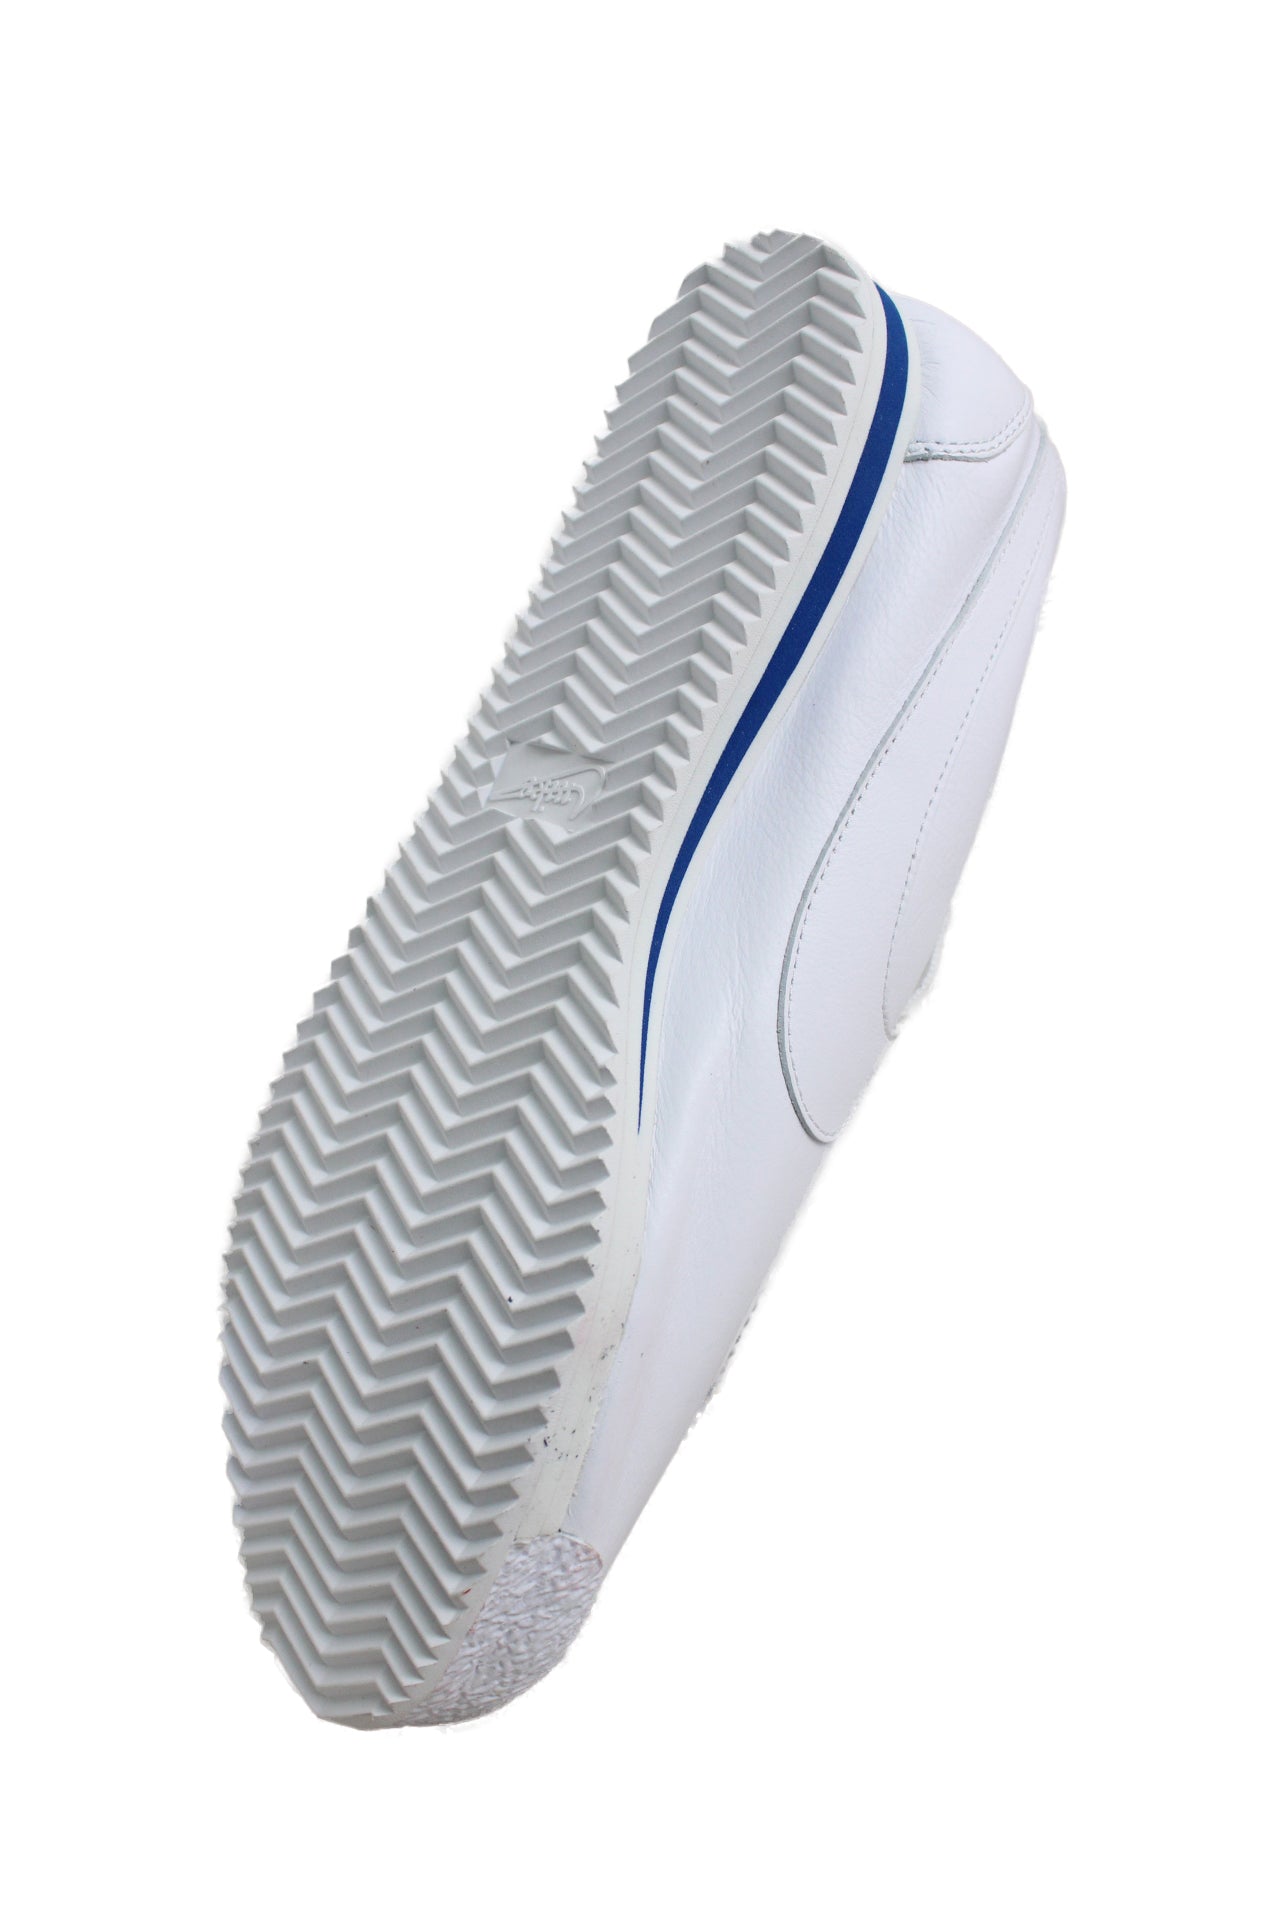 foam rubber sole angle of sneakers with text 'nike' and branded swoosh. 